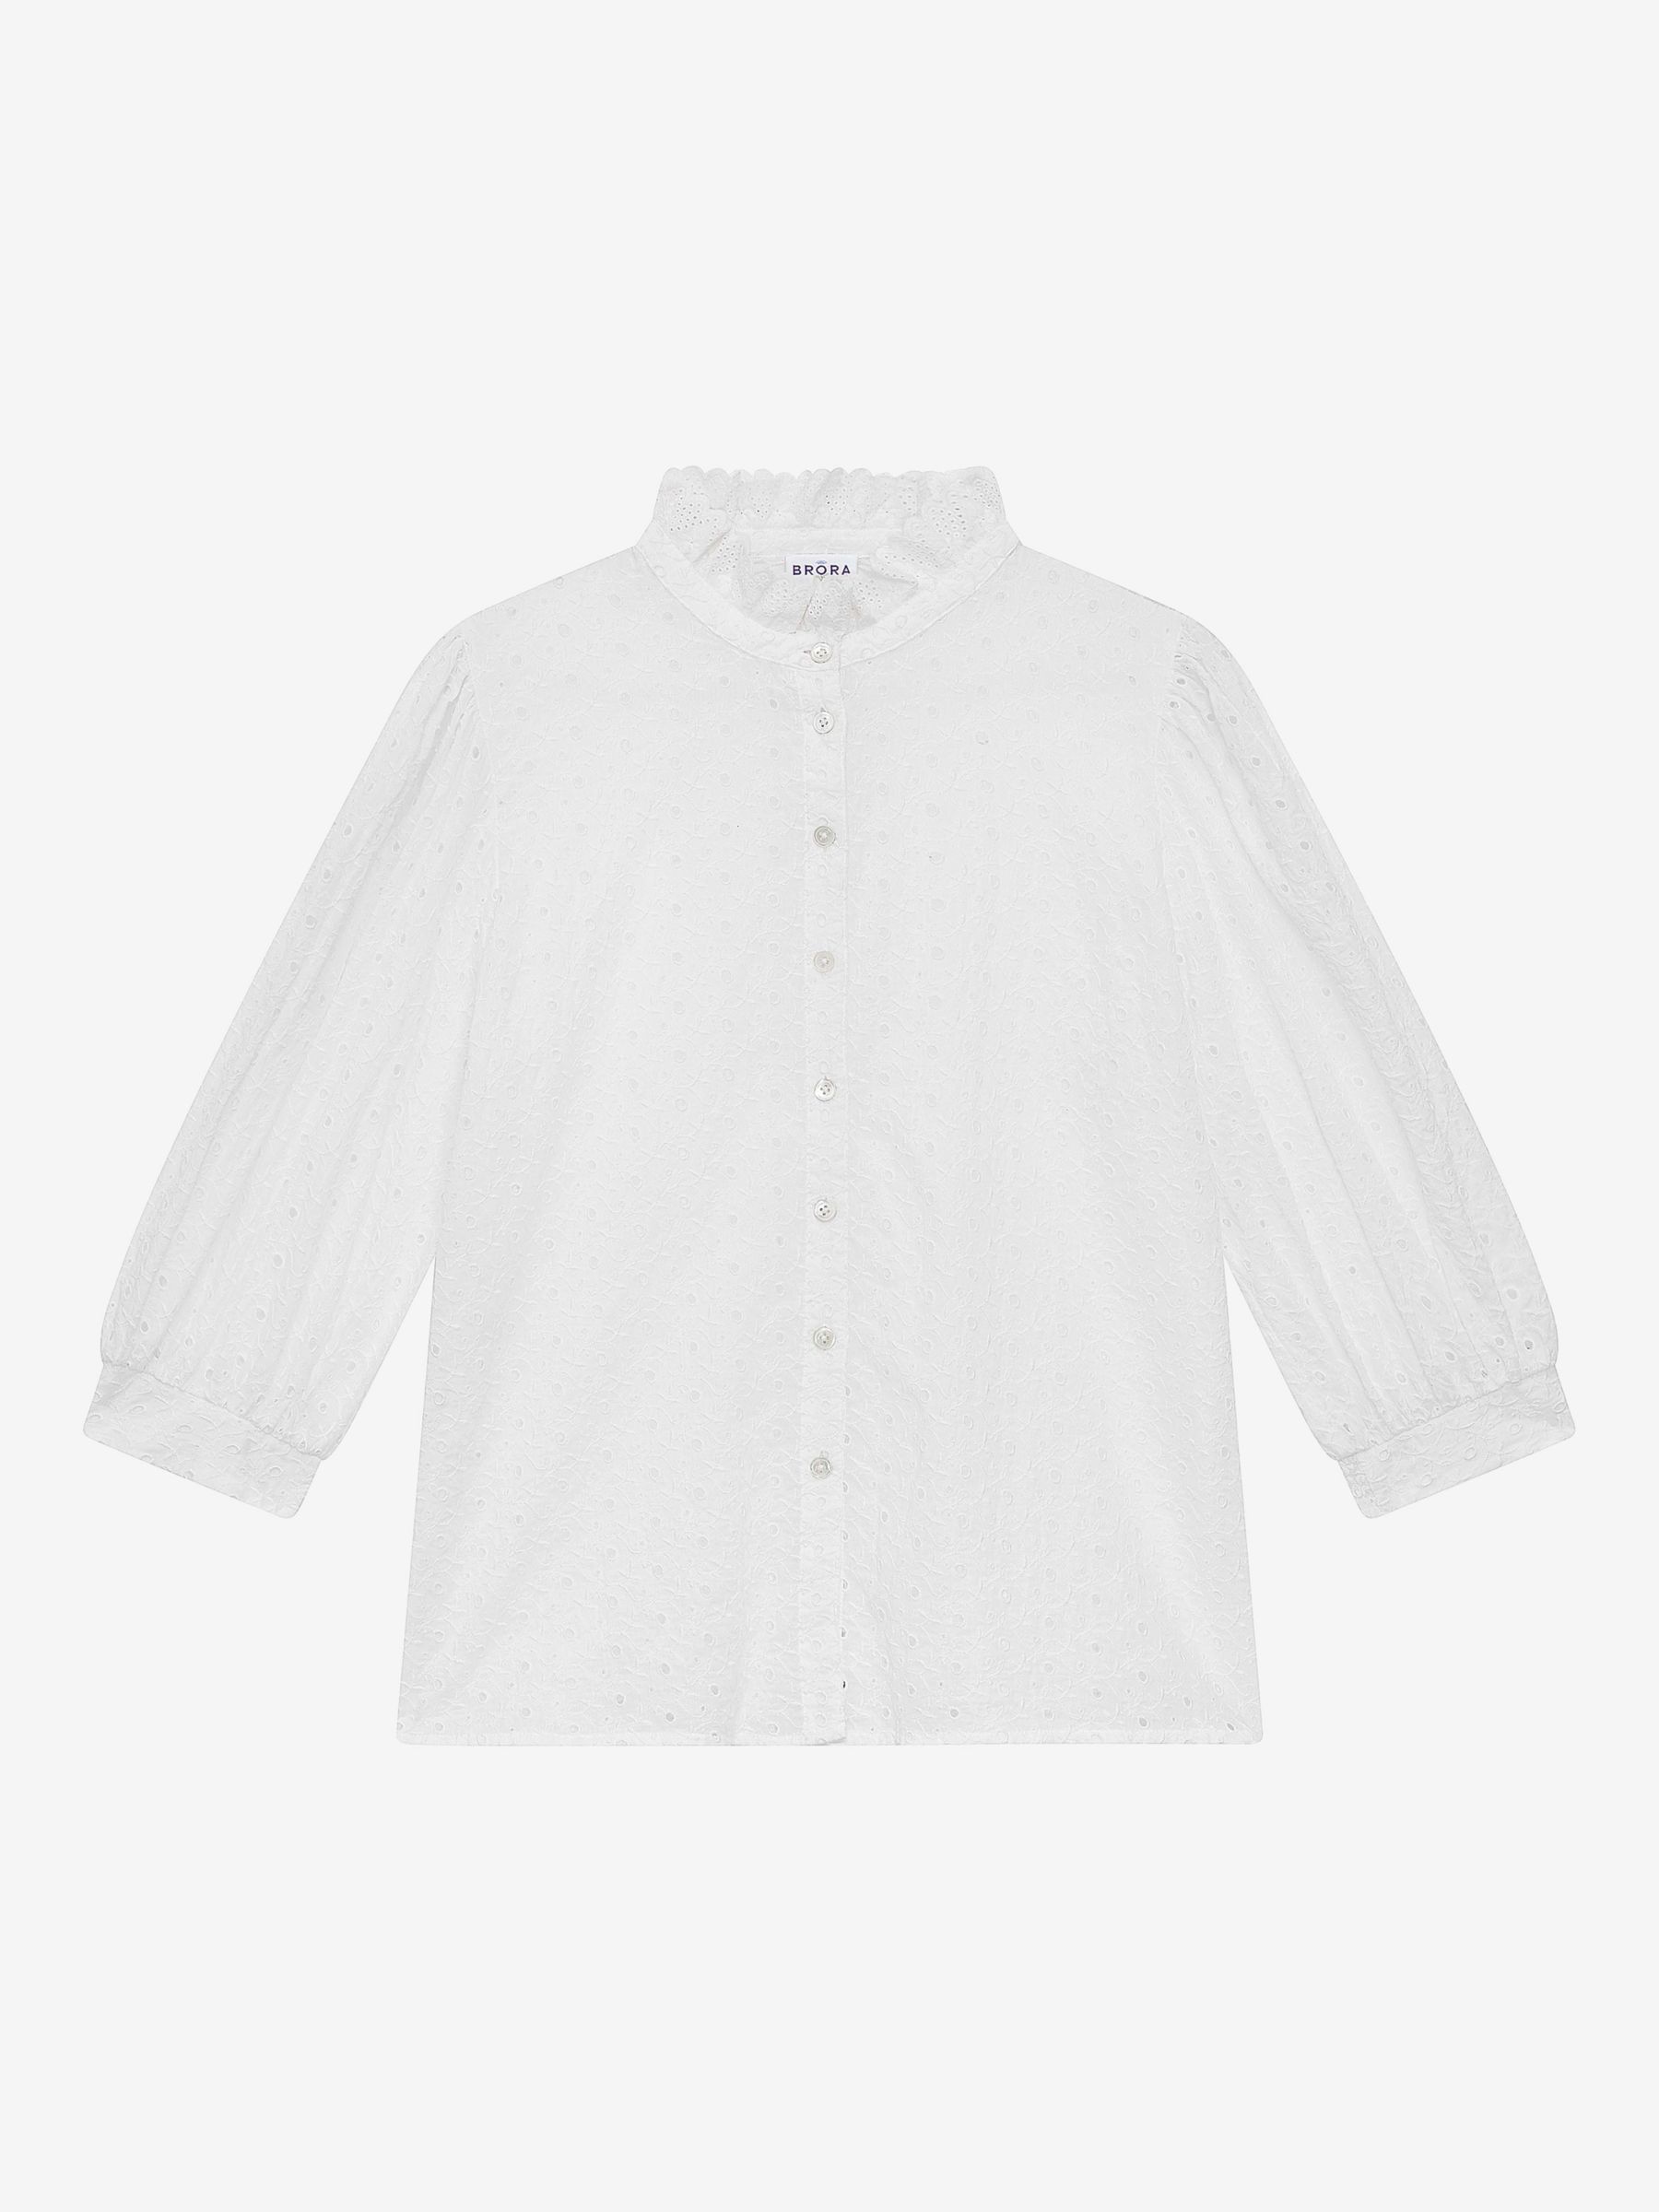 Buy Brora Organic Cotton Broderie Anglaise Blouse, White Online at johnlewis.com